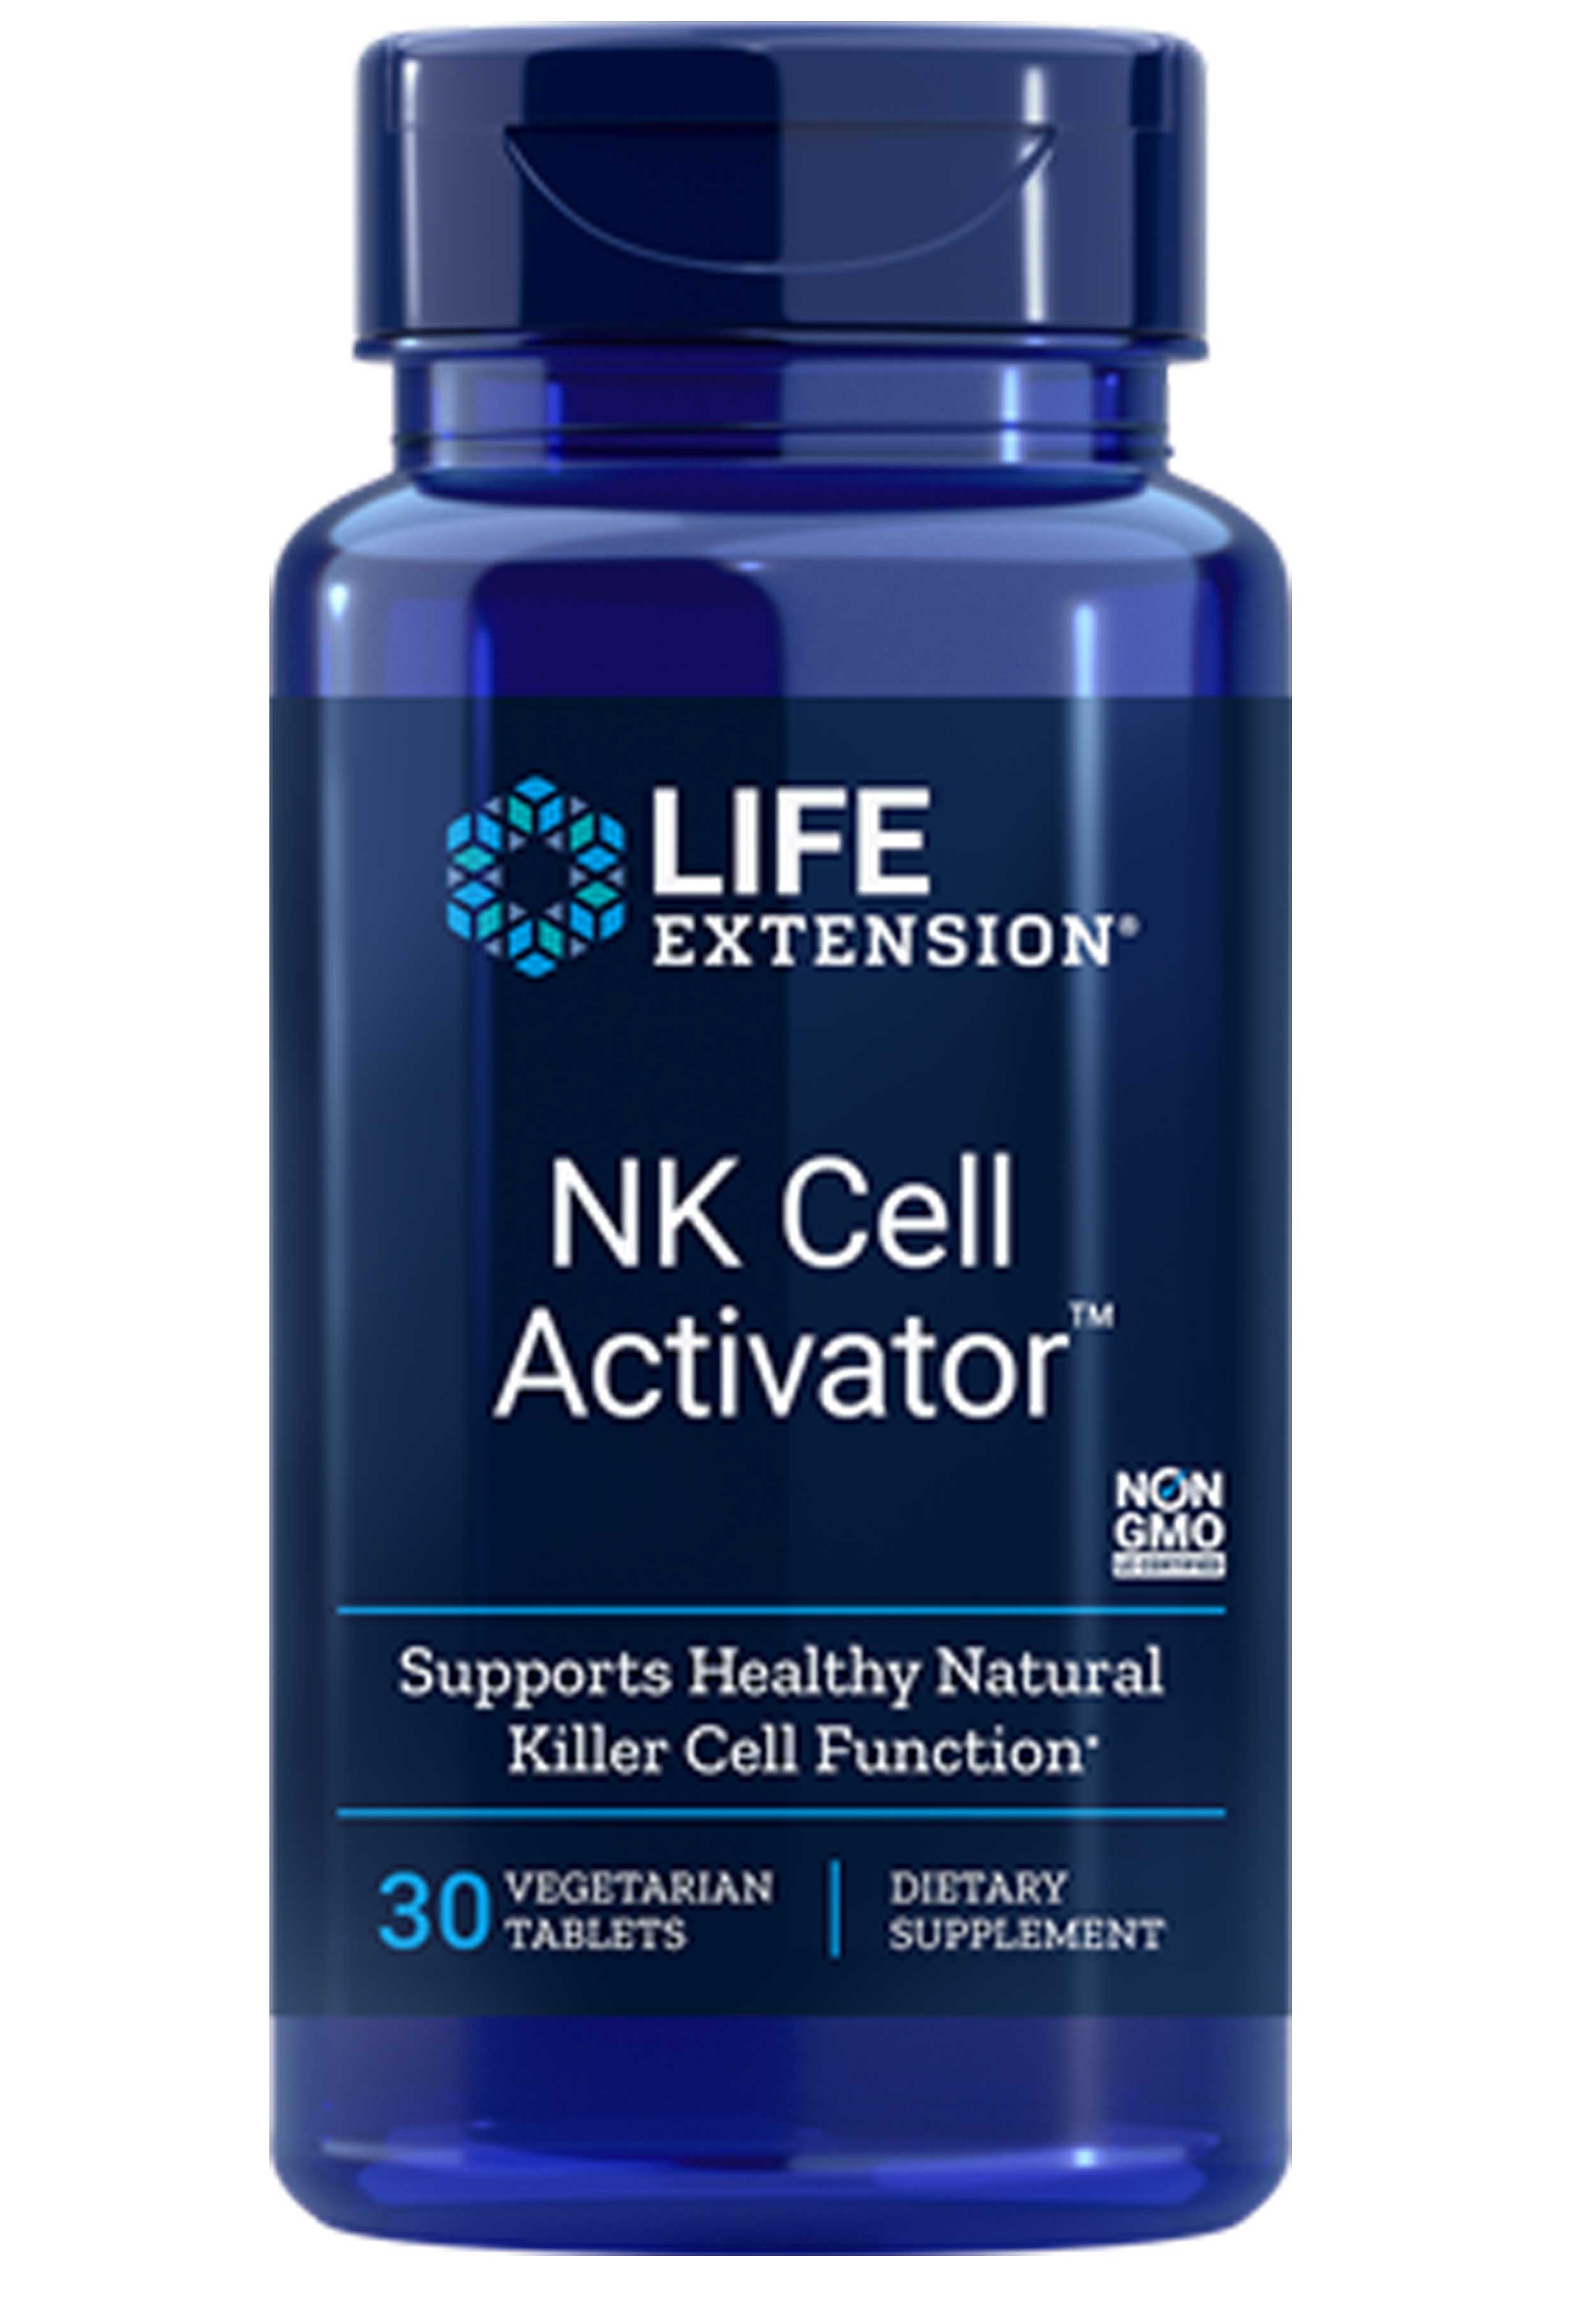 Life Extension NK Cell Activator